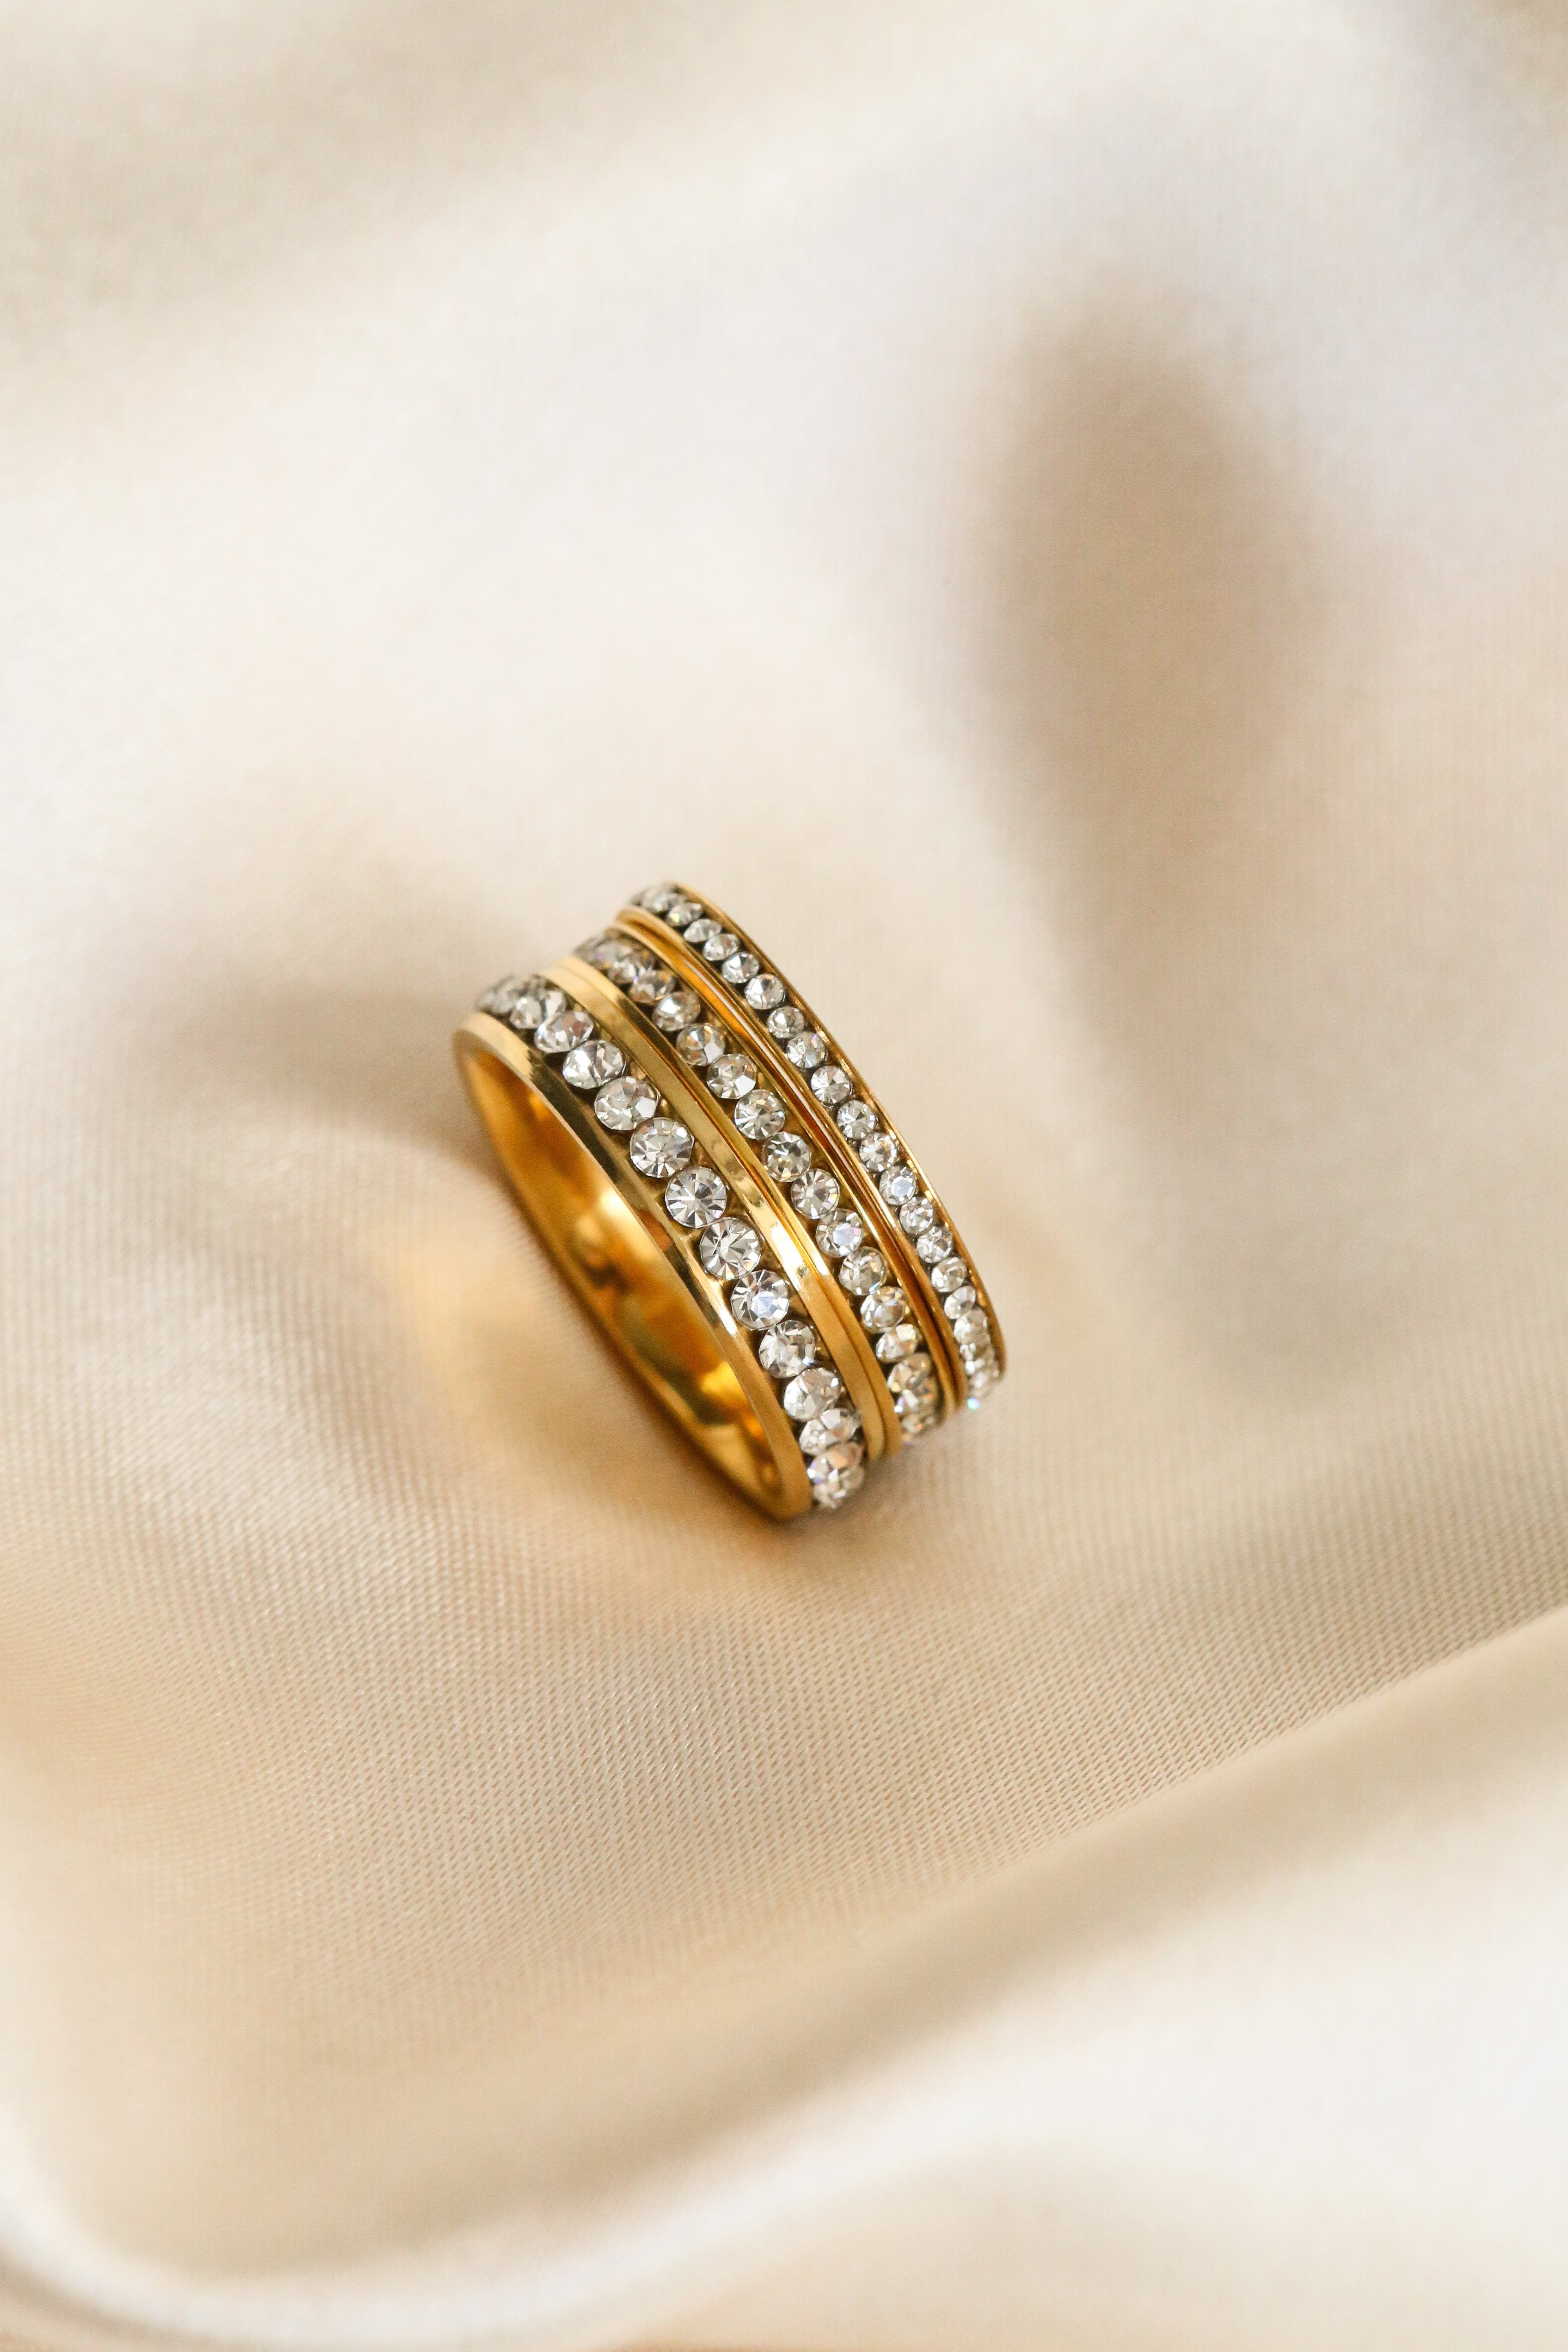 Crystal Ring - Boutique Minimaliste has waterproof, durable, elegant and vintage inspired jewelry